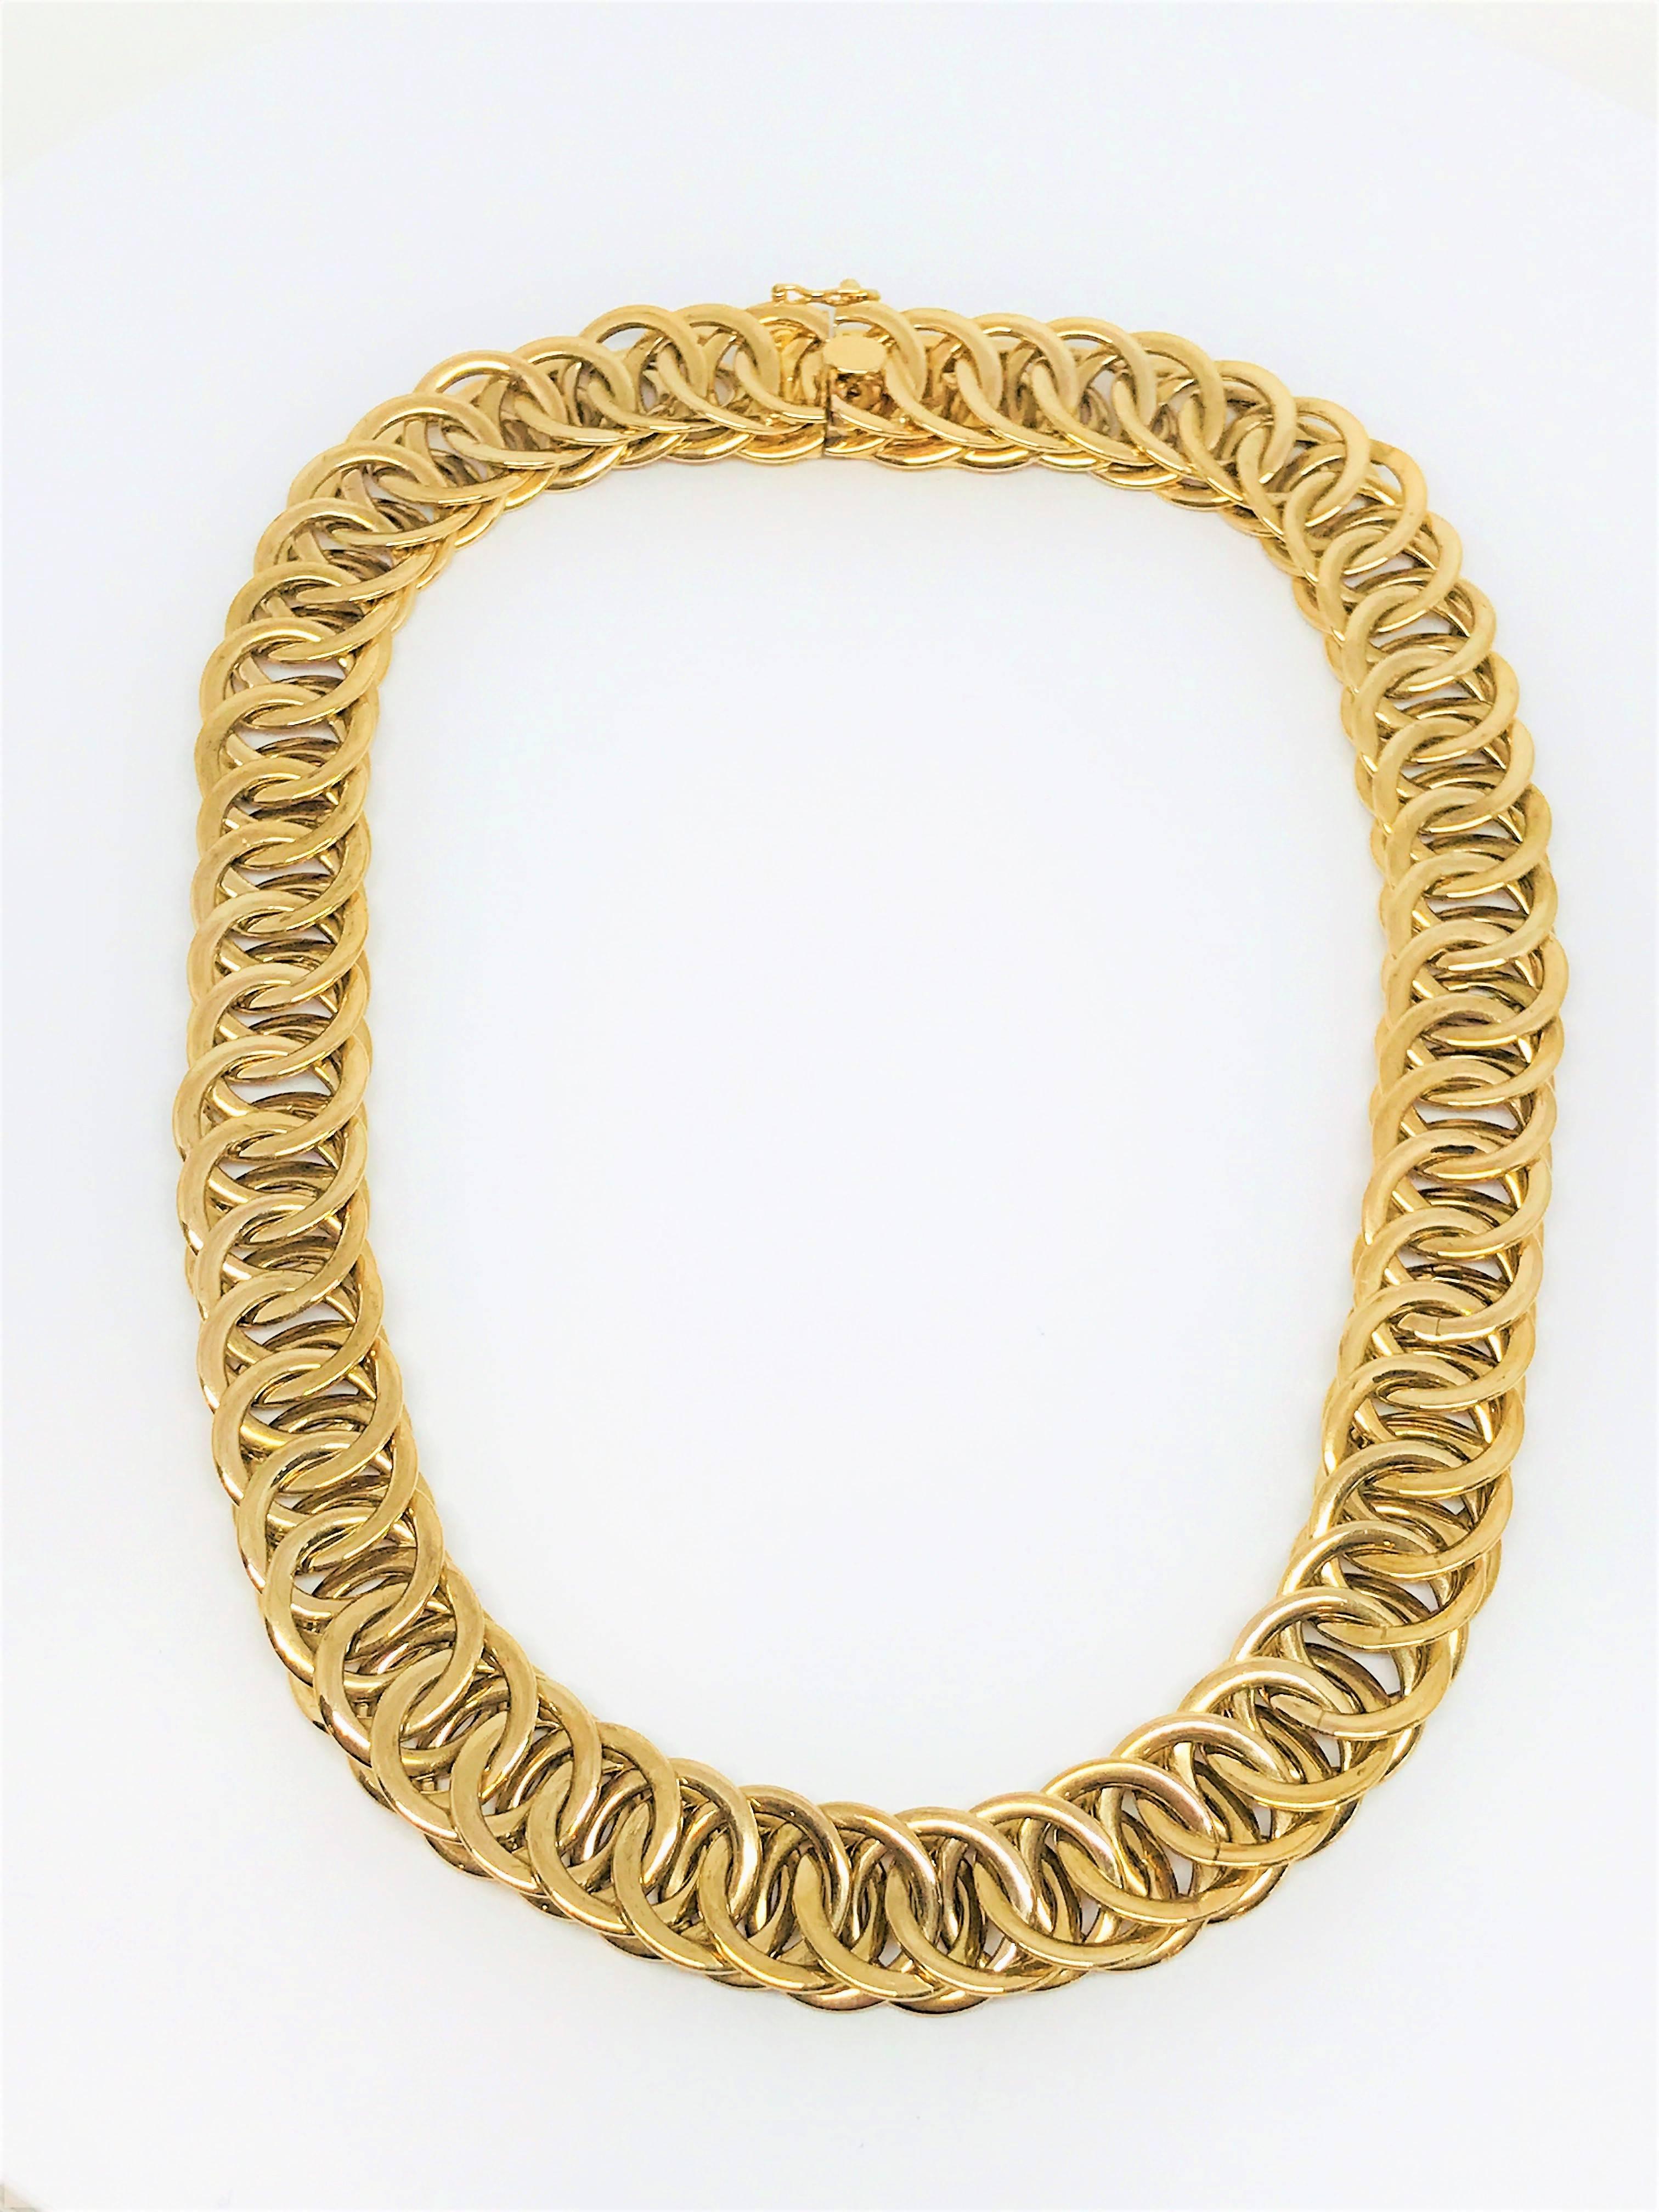 Bold and beautiful 14k yellow gold large circle link choker necklace. This heavy necklace is so comfortable on the neck! It really makes a statement and would go with any outfit or occasion. The hidden box clasp keeps a seamless look to the